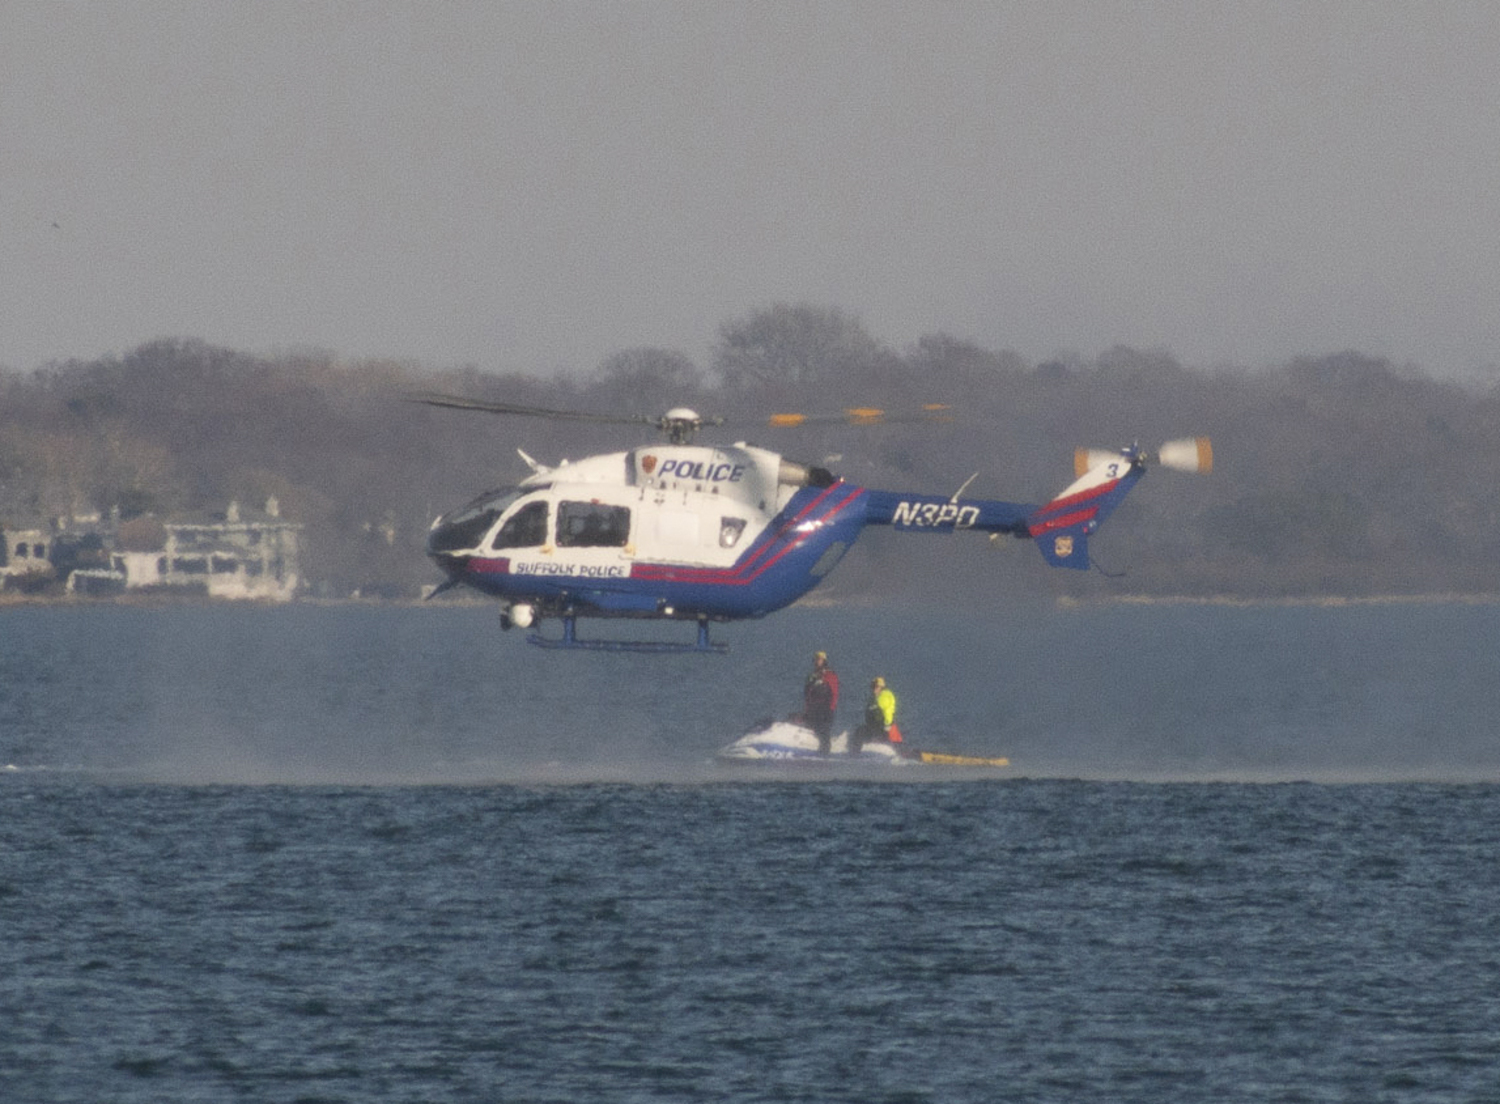 On Saturday Southampton Village Ocean Rescue hosted a drill with the Suffolk County Police Department and East Hampton Volunteer Ocean Rescue. TREVOR PARKER